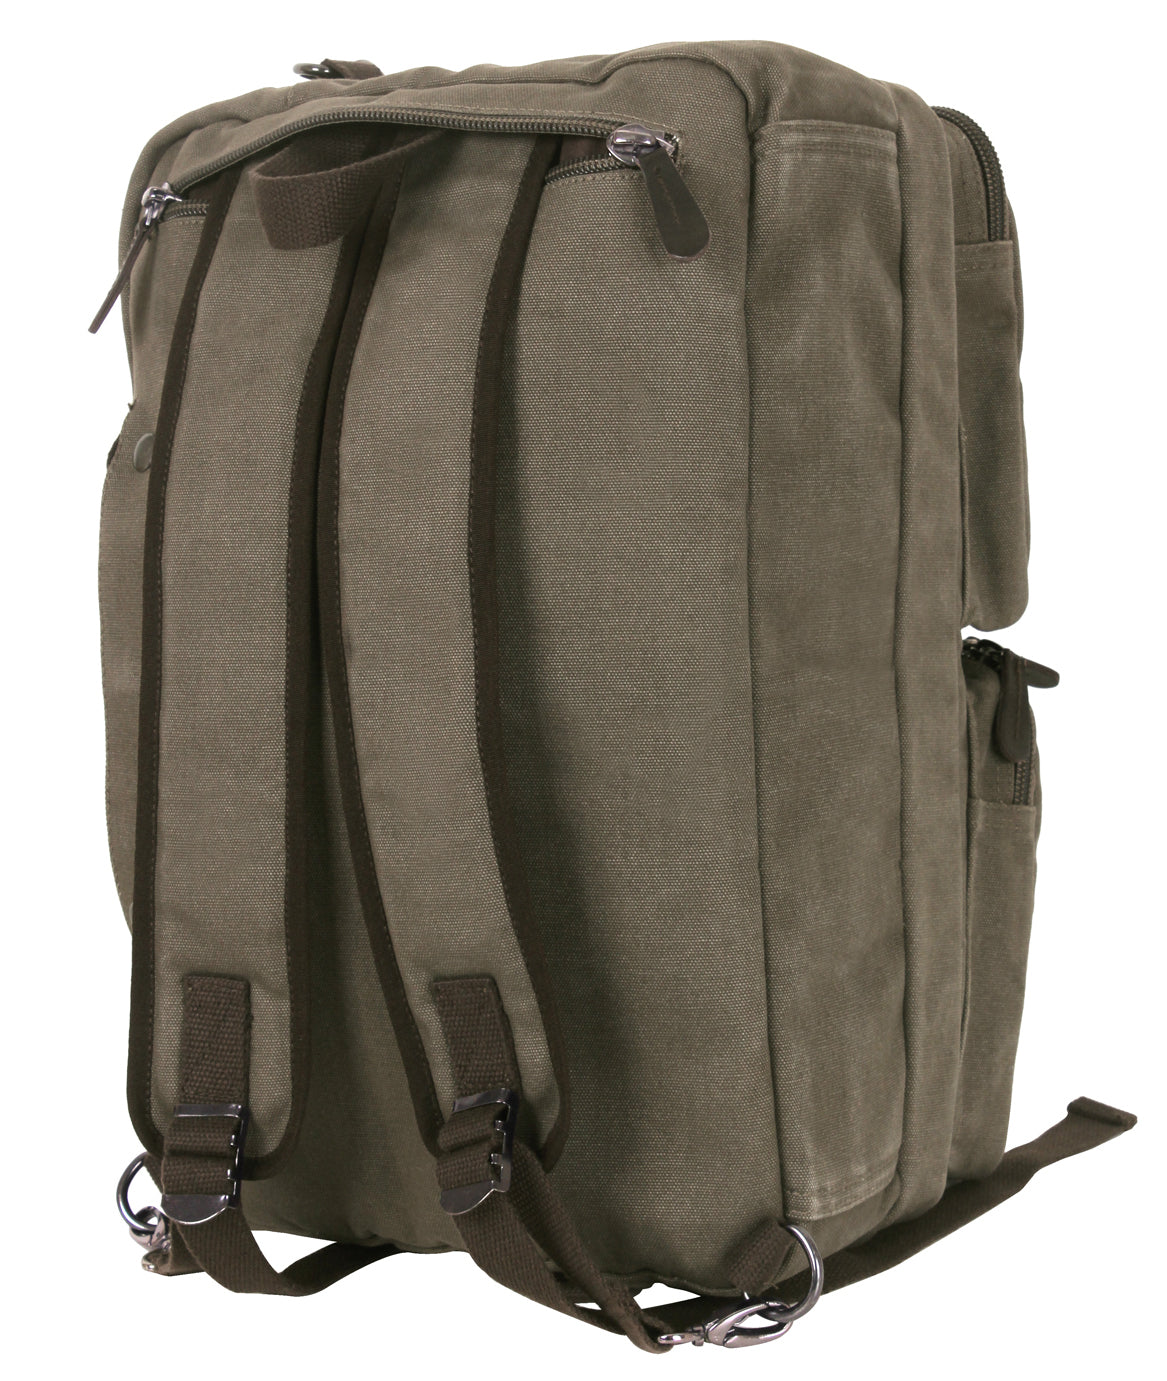 Rothco Canvas Briefcase Backpack - Olive Drab Convertible Briefcase/Backpack